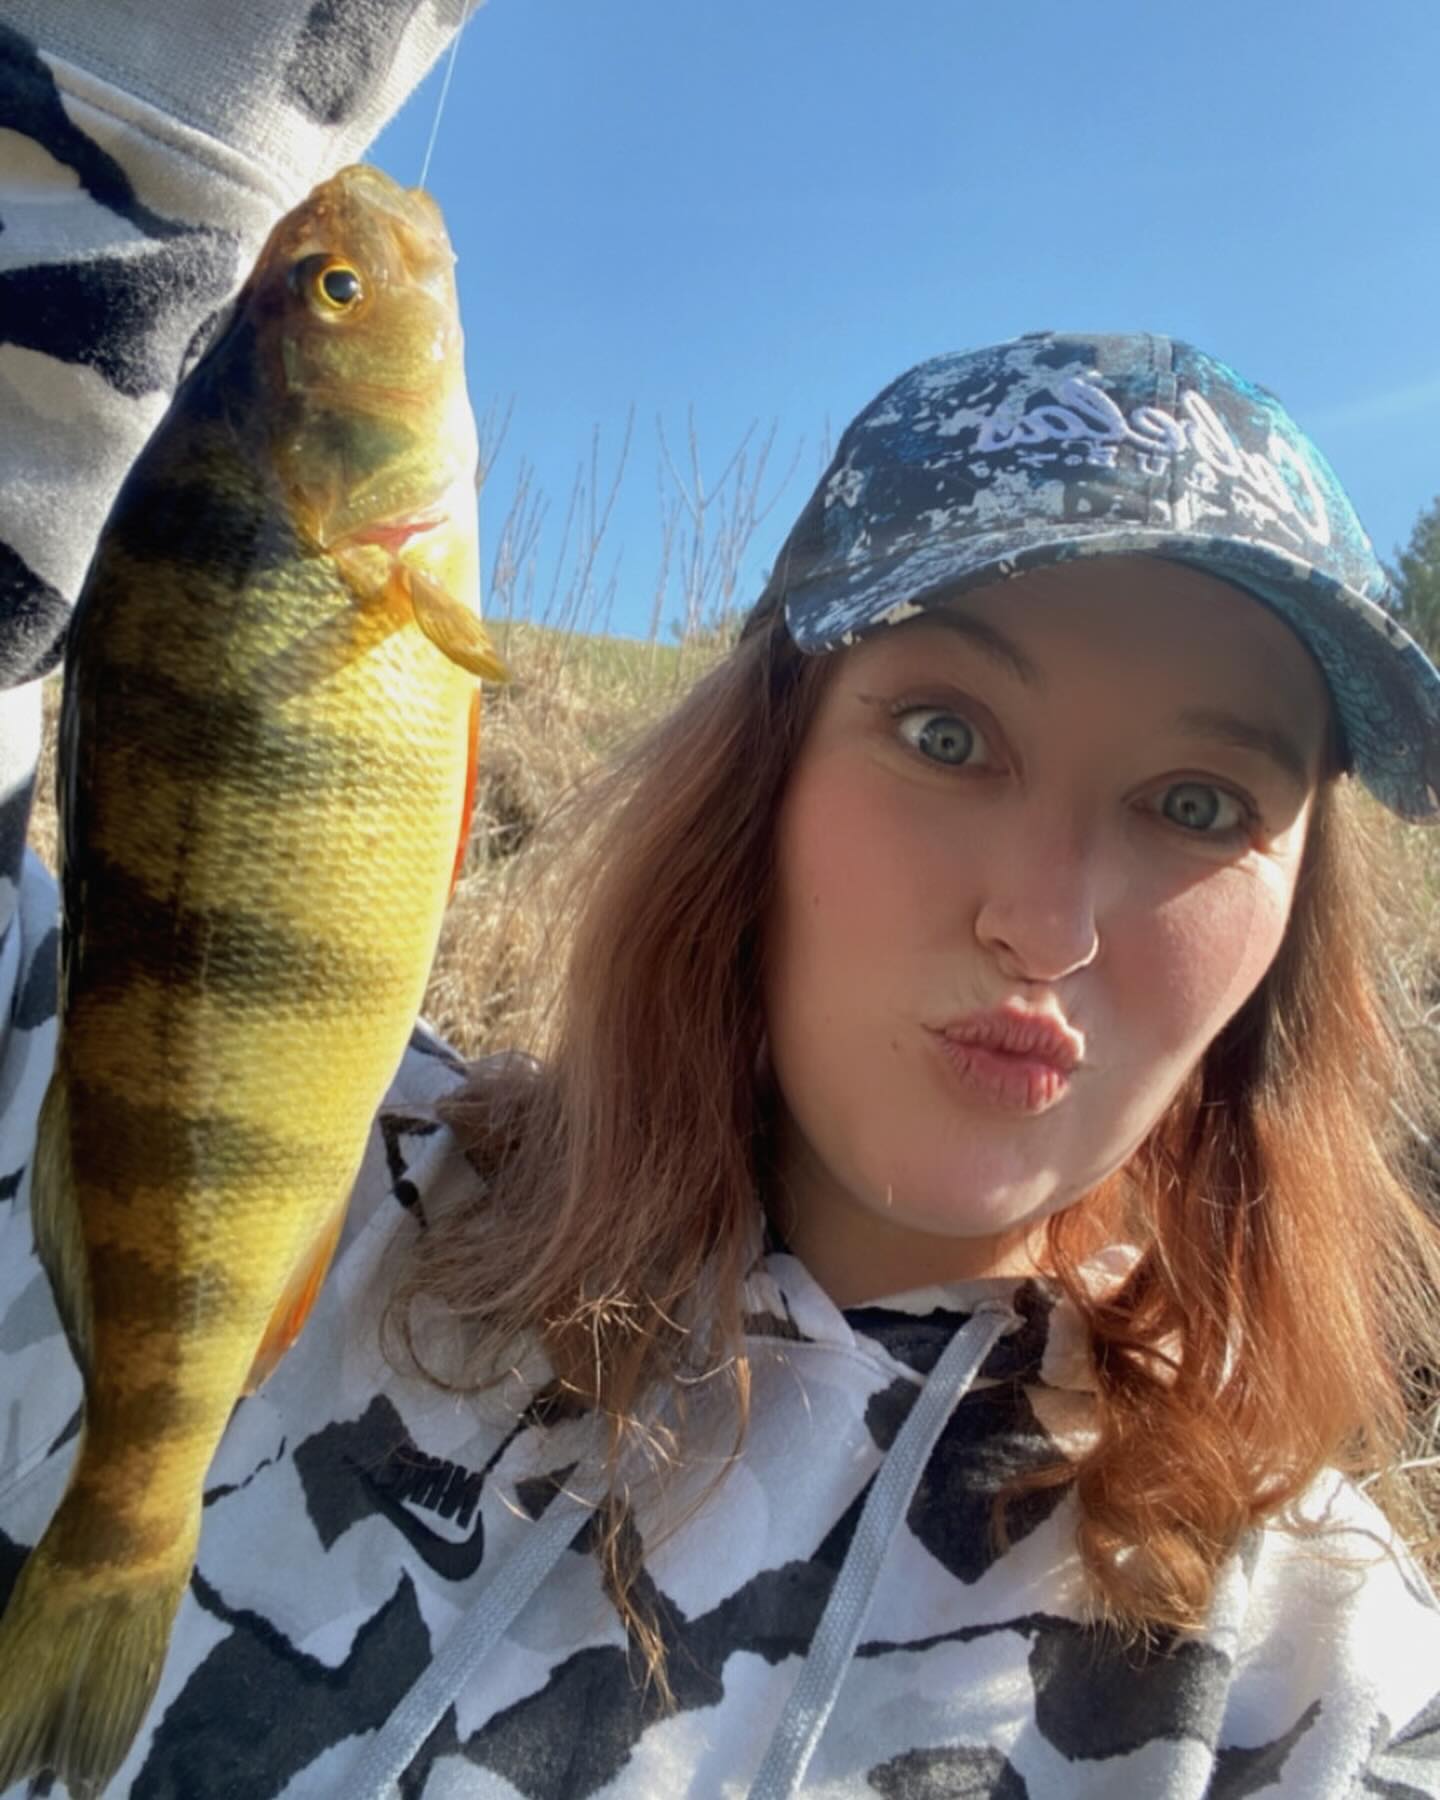 Pork chop and I were hammering perch yesterday perfect day for fishing ❤️